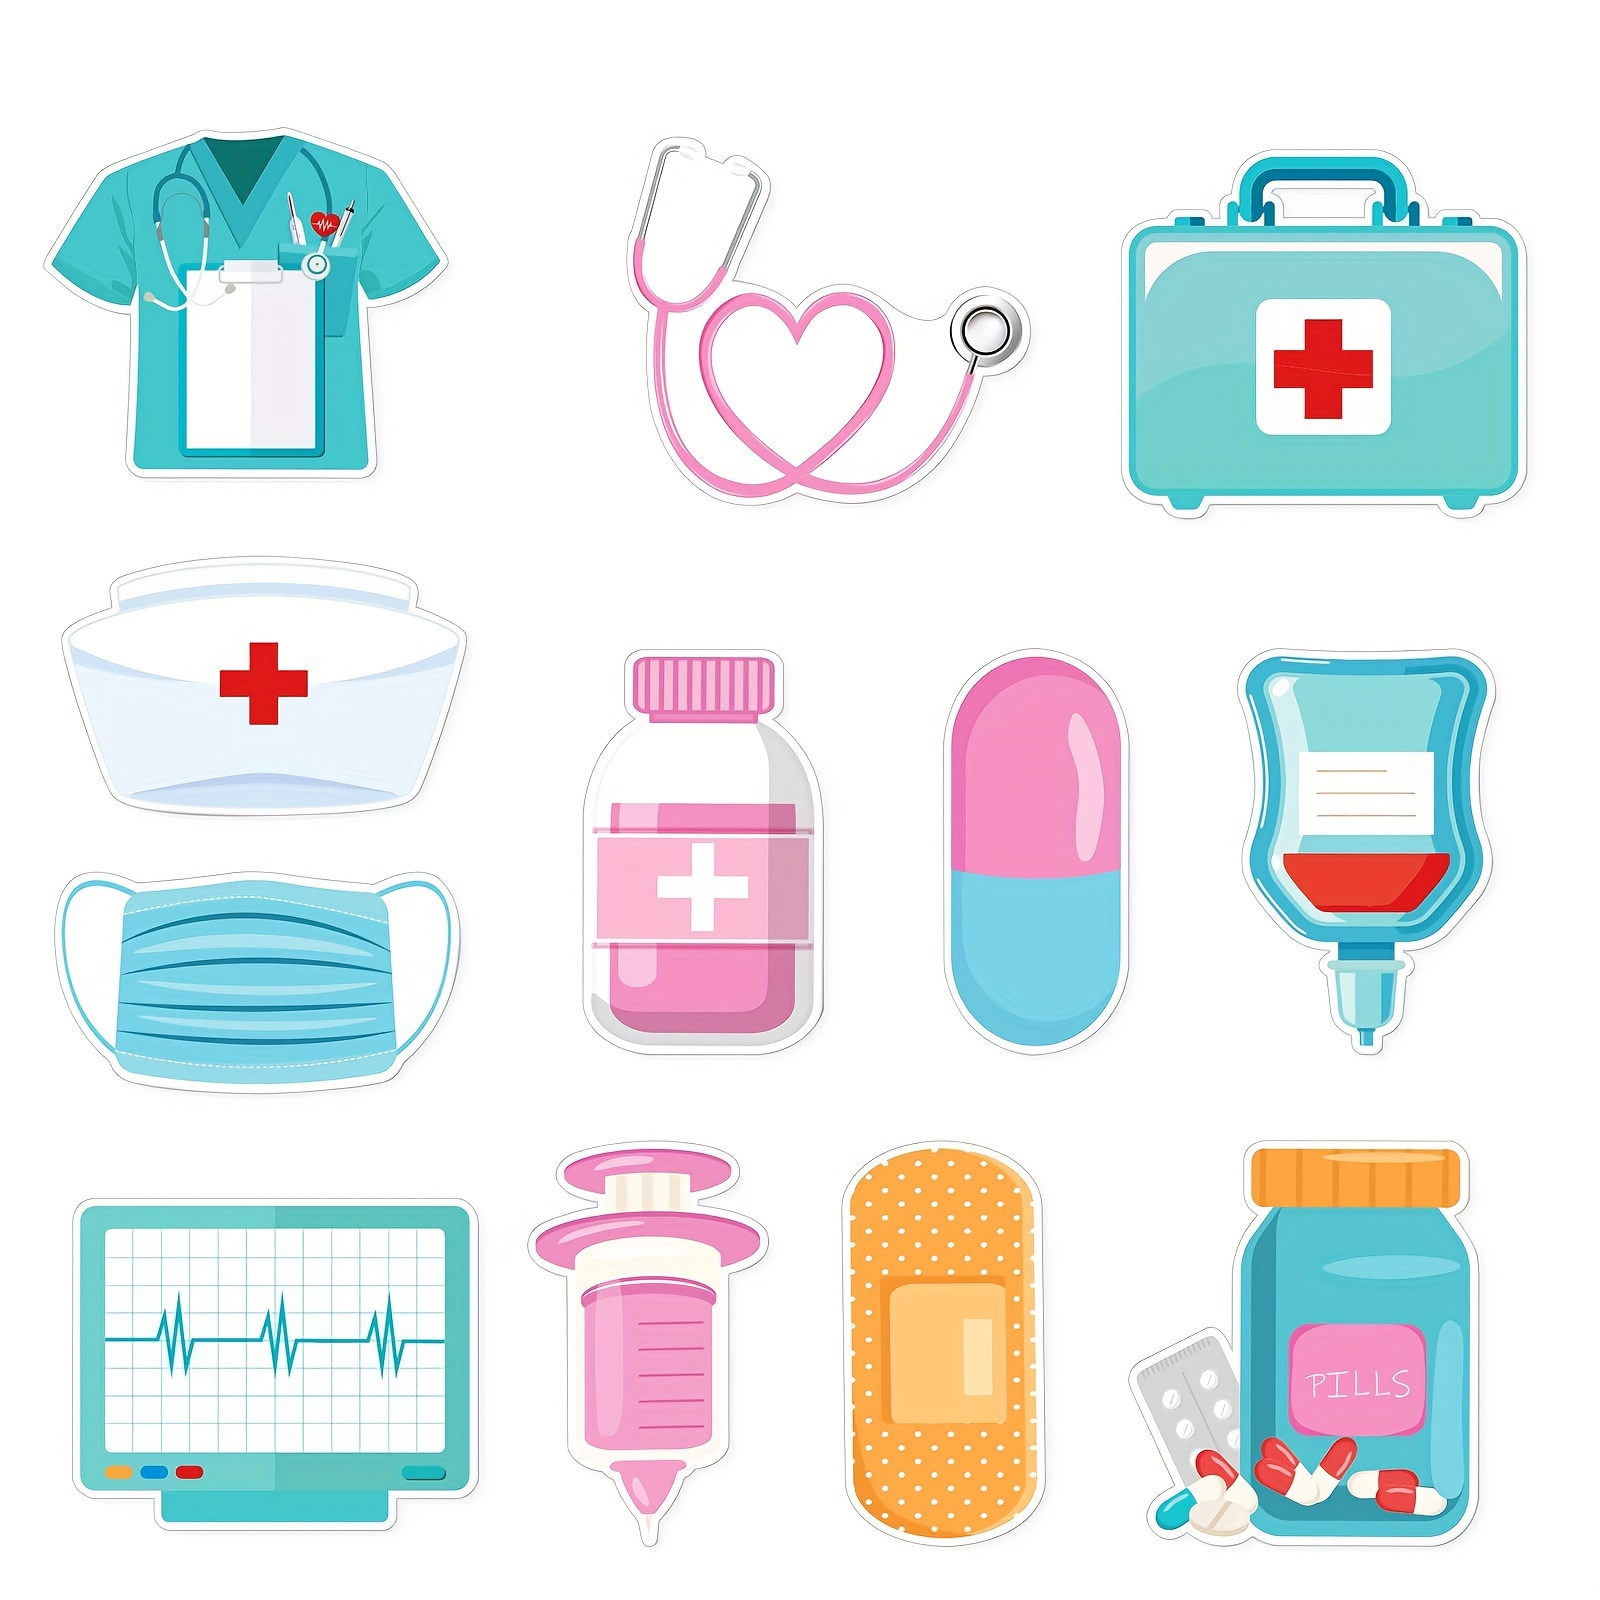 

12 Pack Fun Nurse-themed Sticky Notes Set - Self-adhesive Memo Pads For Nursing School Essentials, Hospital Assistants Accessories, Nurse And Doctor Supplies - Ideal Gifts For Nurses.